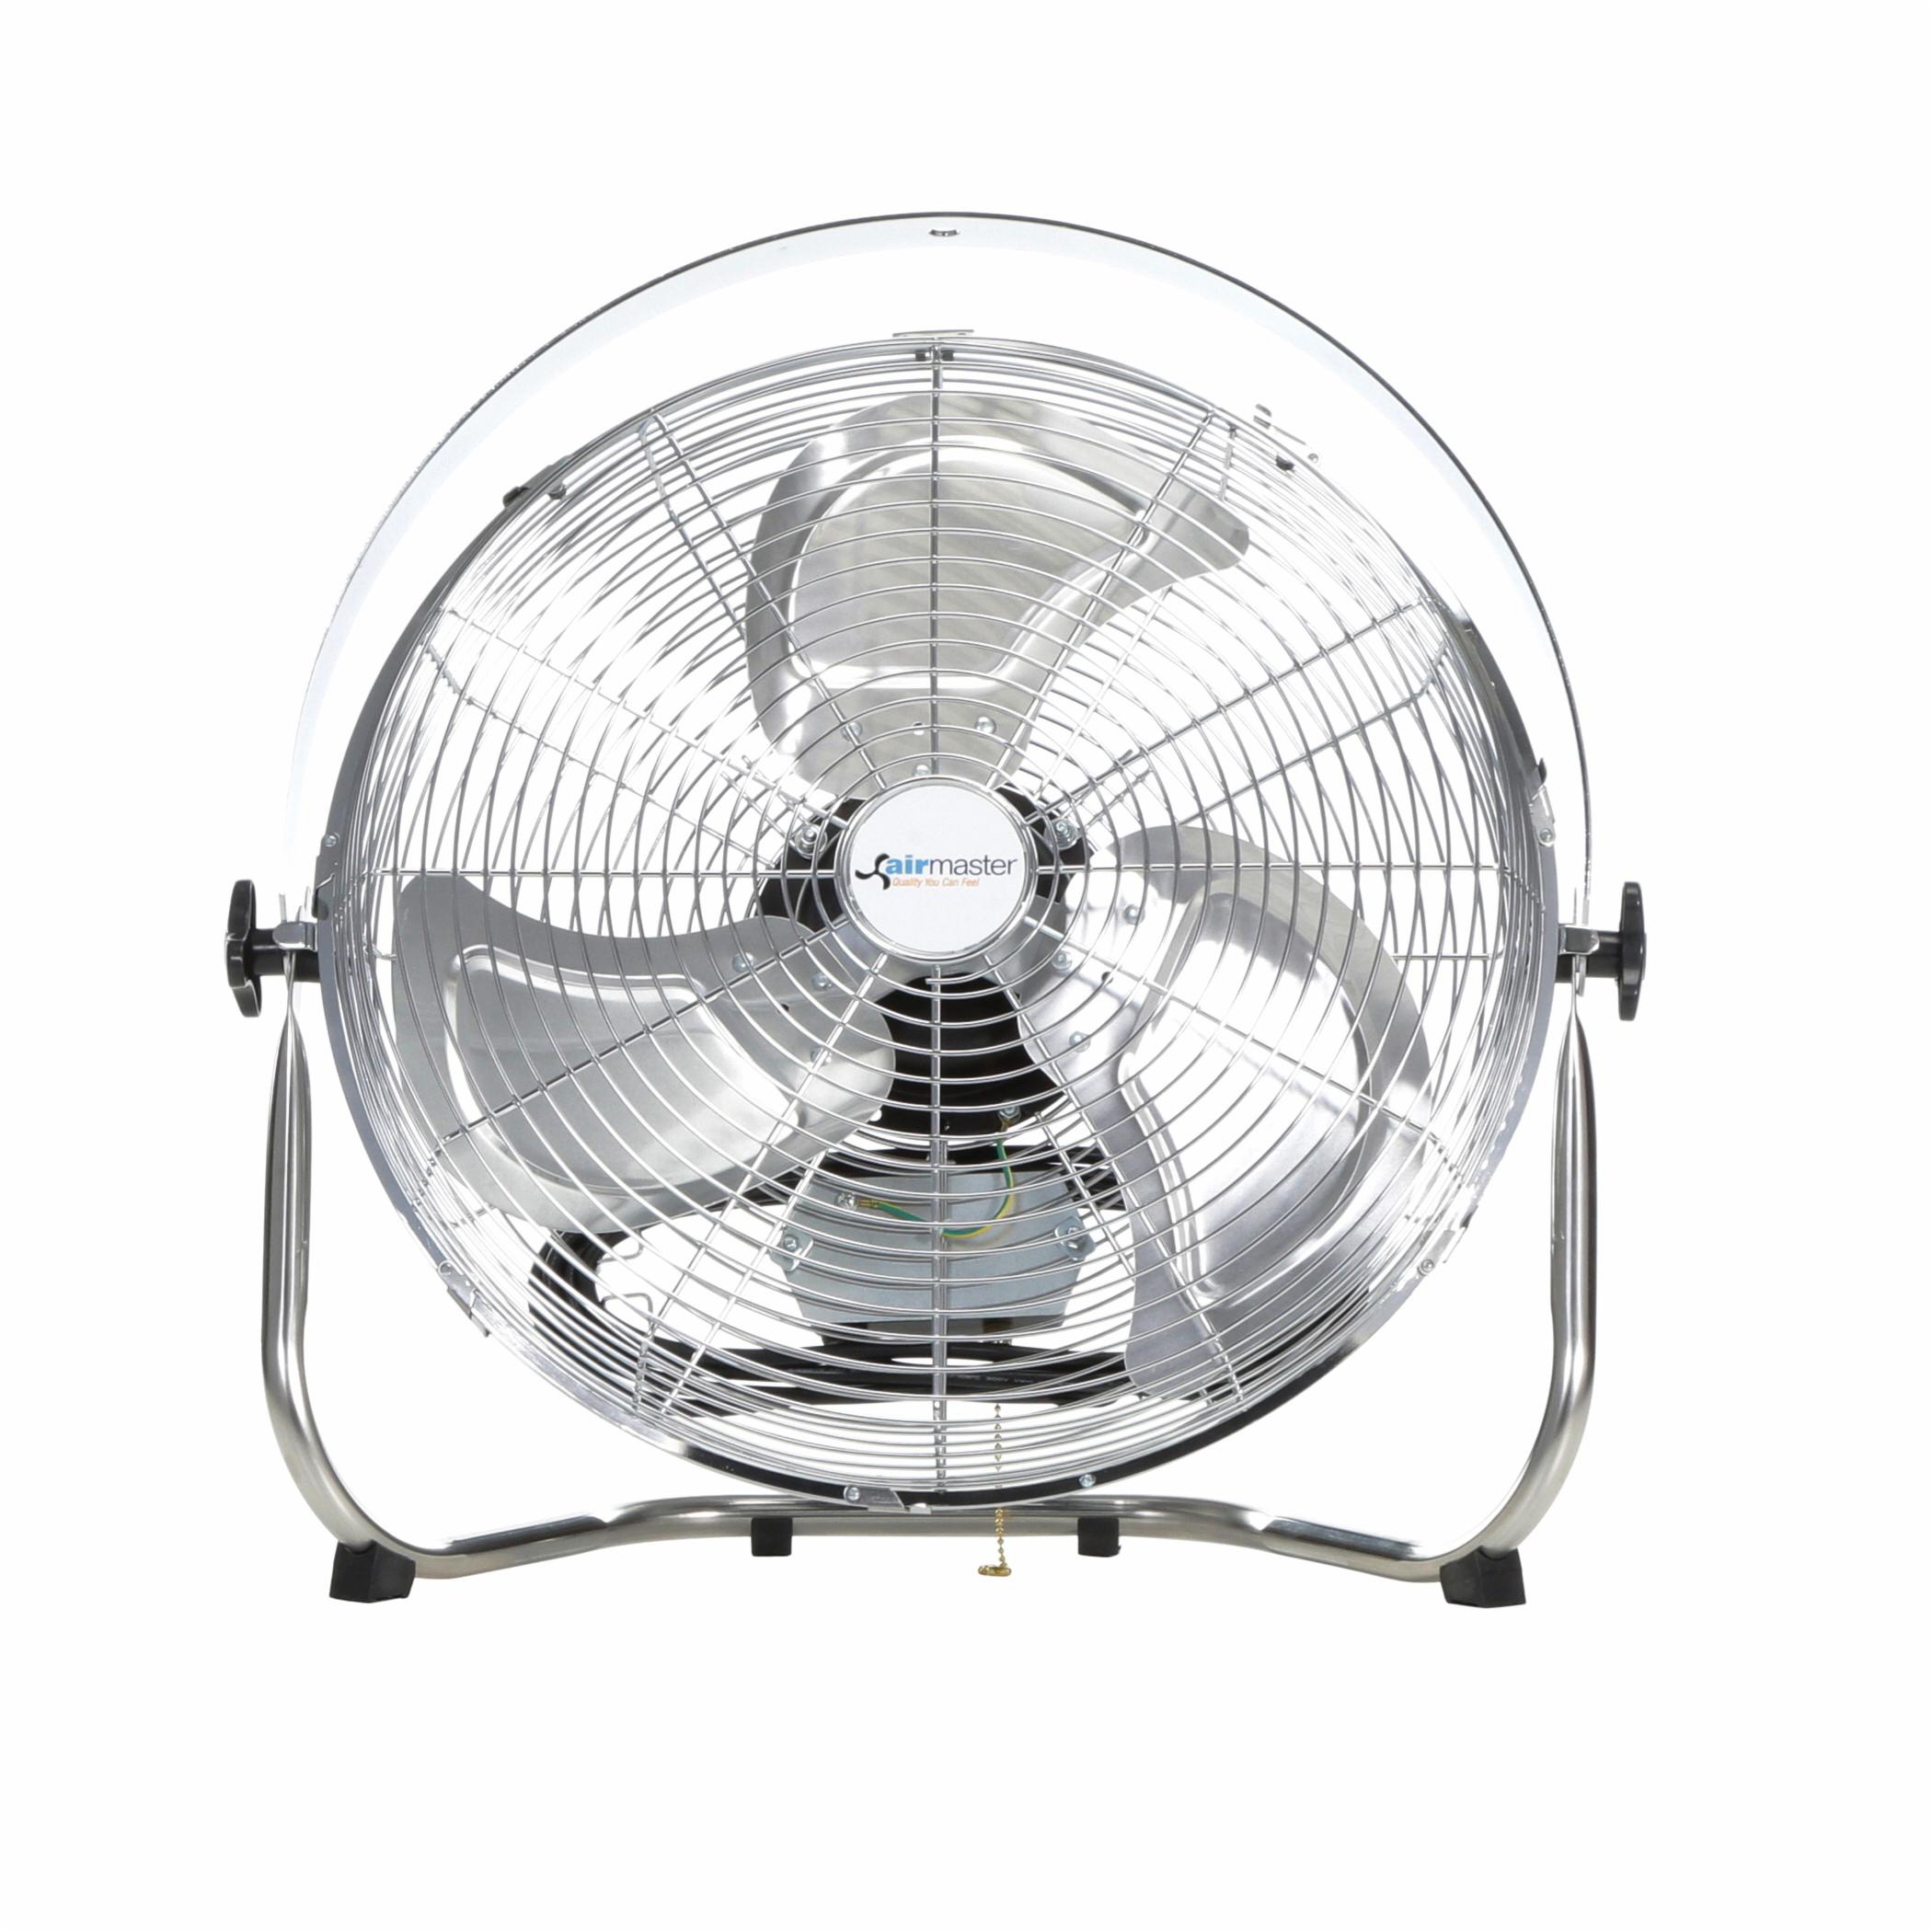 Airmaster® 78975 Commercial Low Stand Non-Oscillating Pivot Fan, 20 in Blade, 3390/2755/2295 cfm Flow Rate, 115 VAC, 1.9 A